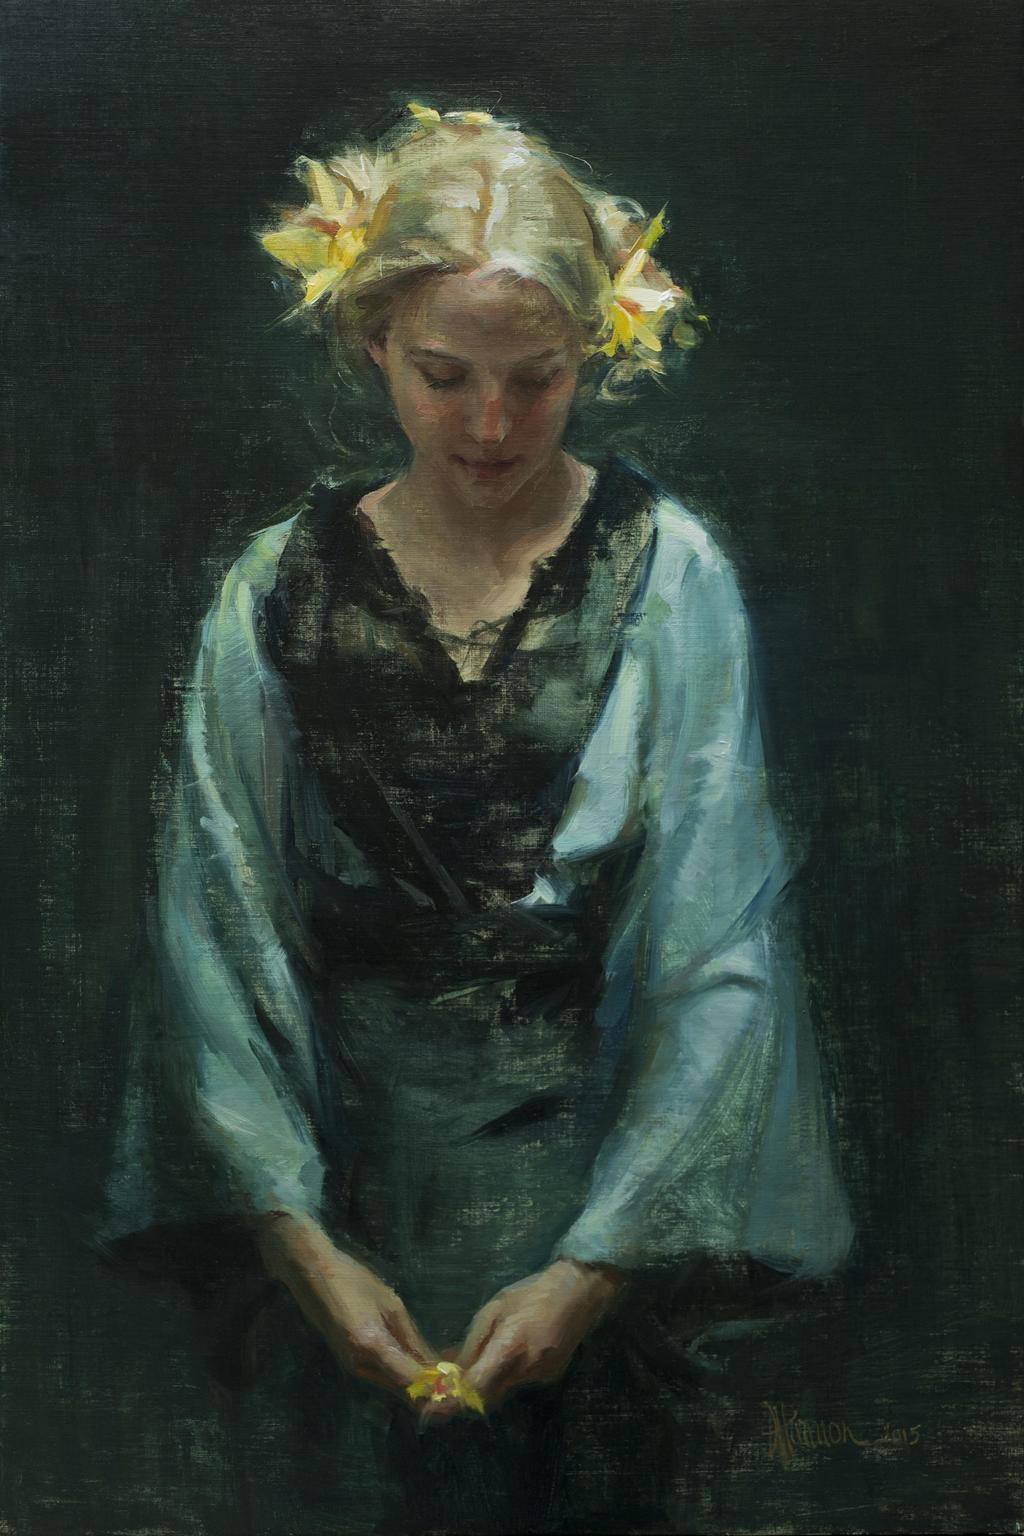 Johanna Harmon’s ‘Golden Orchids’, 24”H x 16”W, Oil on Linen, is the recipient of Portrait Society of America’s (PSA’s): Certificate of Excellence, PSA’s 2016 International Portrait Competition 1st Place Award Winner, PSA’s 2015 Member’s Only Competition (MOC), Non-Commission Category Copyright: 2015 Johanna Harmon 